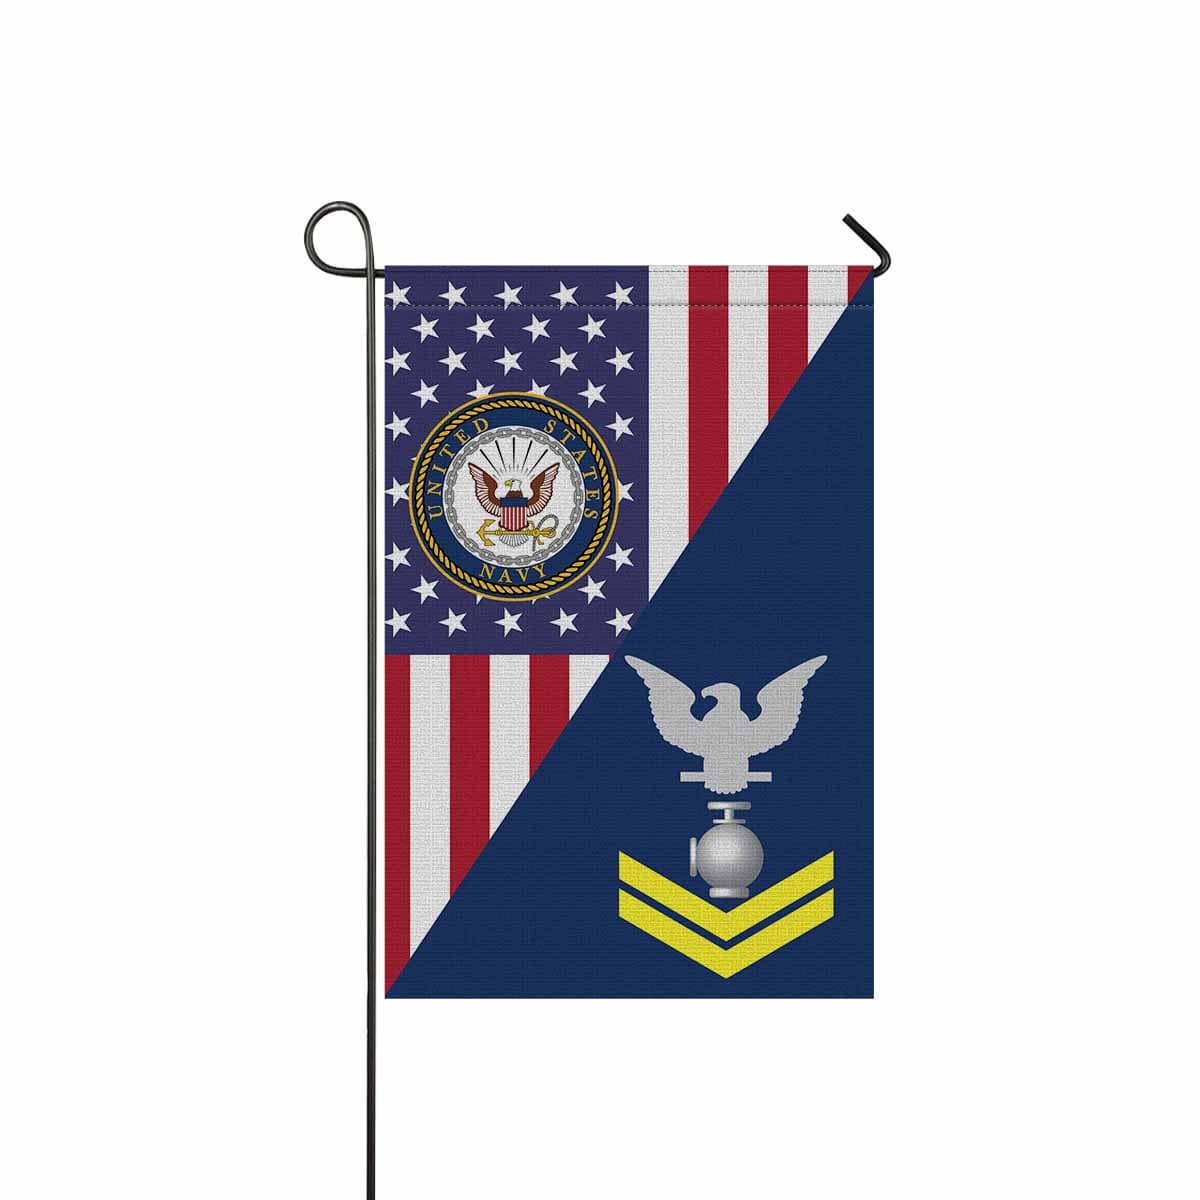 Navy Utilitiesman Navy UT E-5 Gold Stripe Garden Flag/Yard Flag 12 inches x 18 inches Twin-Side Printing-GDFlag-Navy-Rating-Veterans Nation